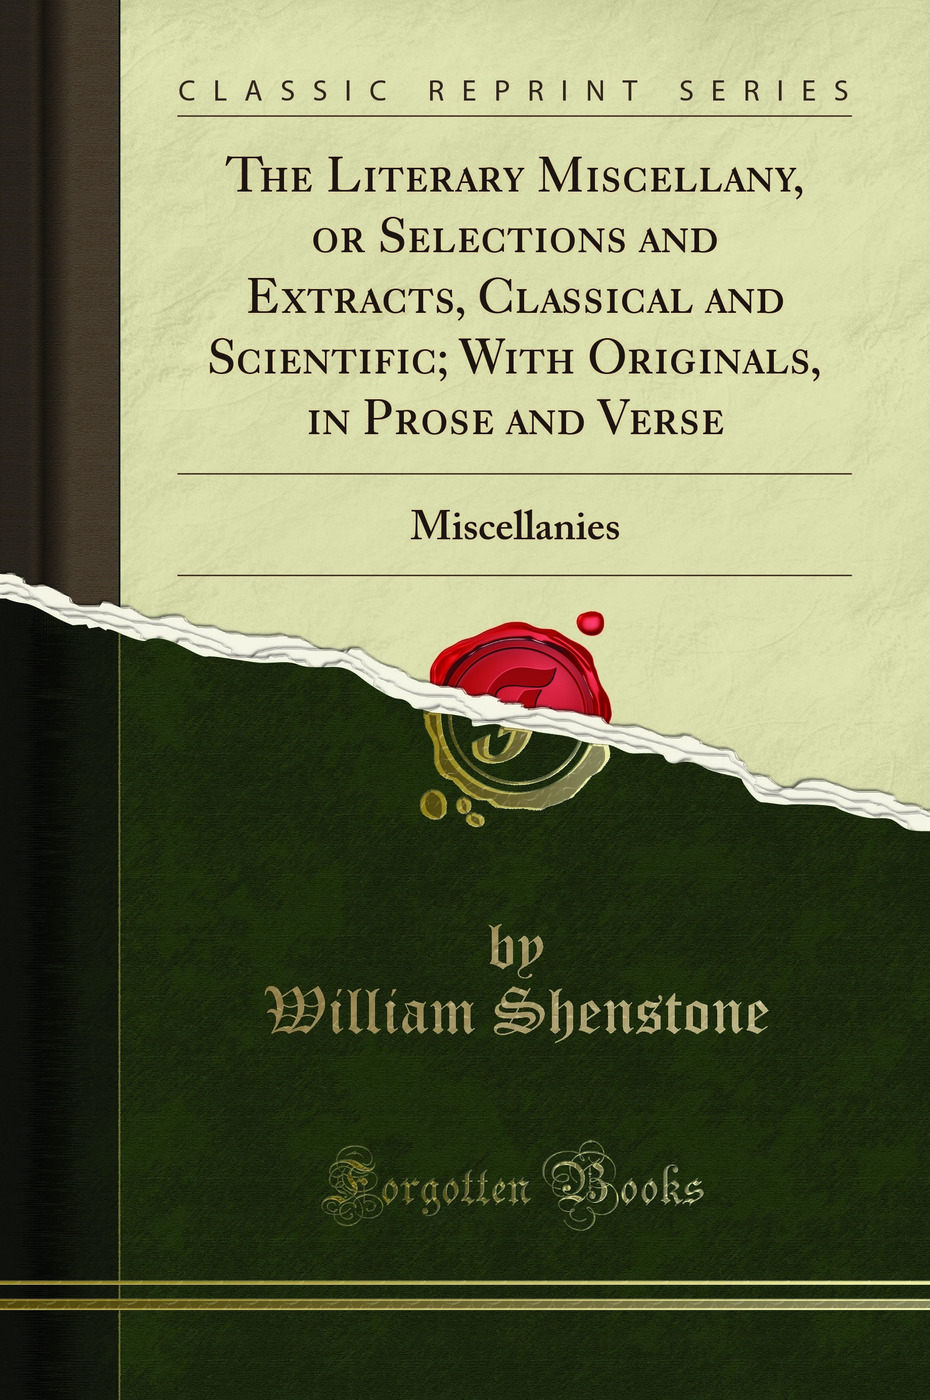 The Literary Miscellany, or Selections and Extracts, Classical and Scientific - William Shenstone, Benjamin Franklin